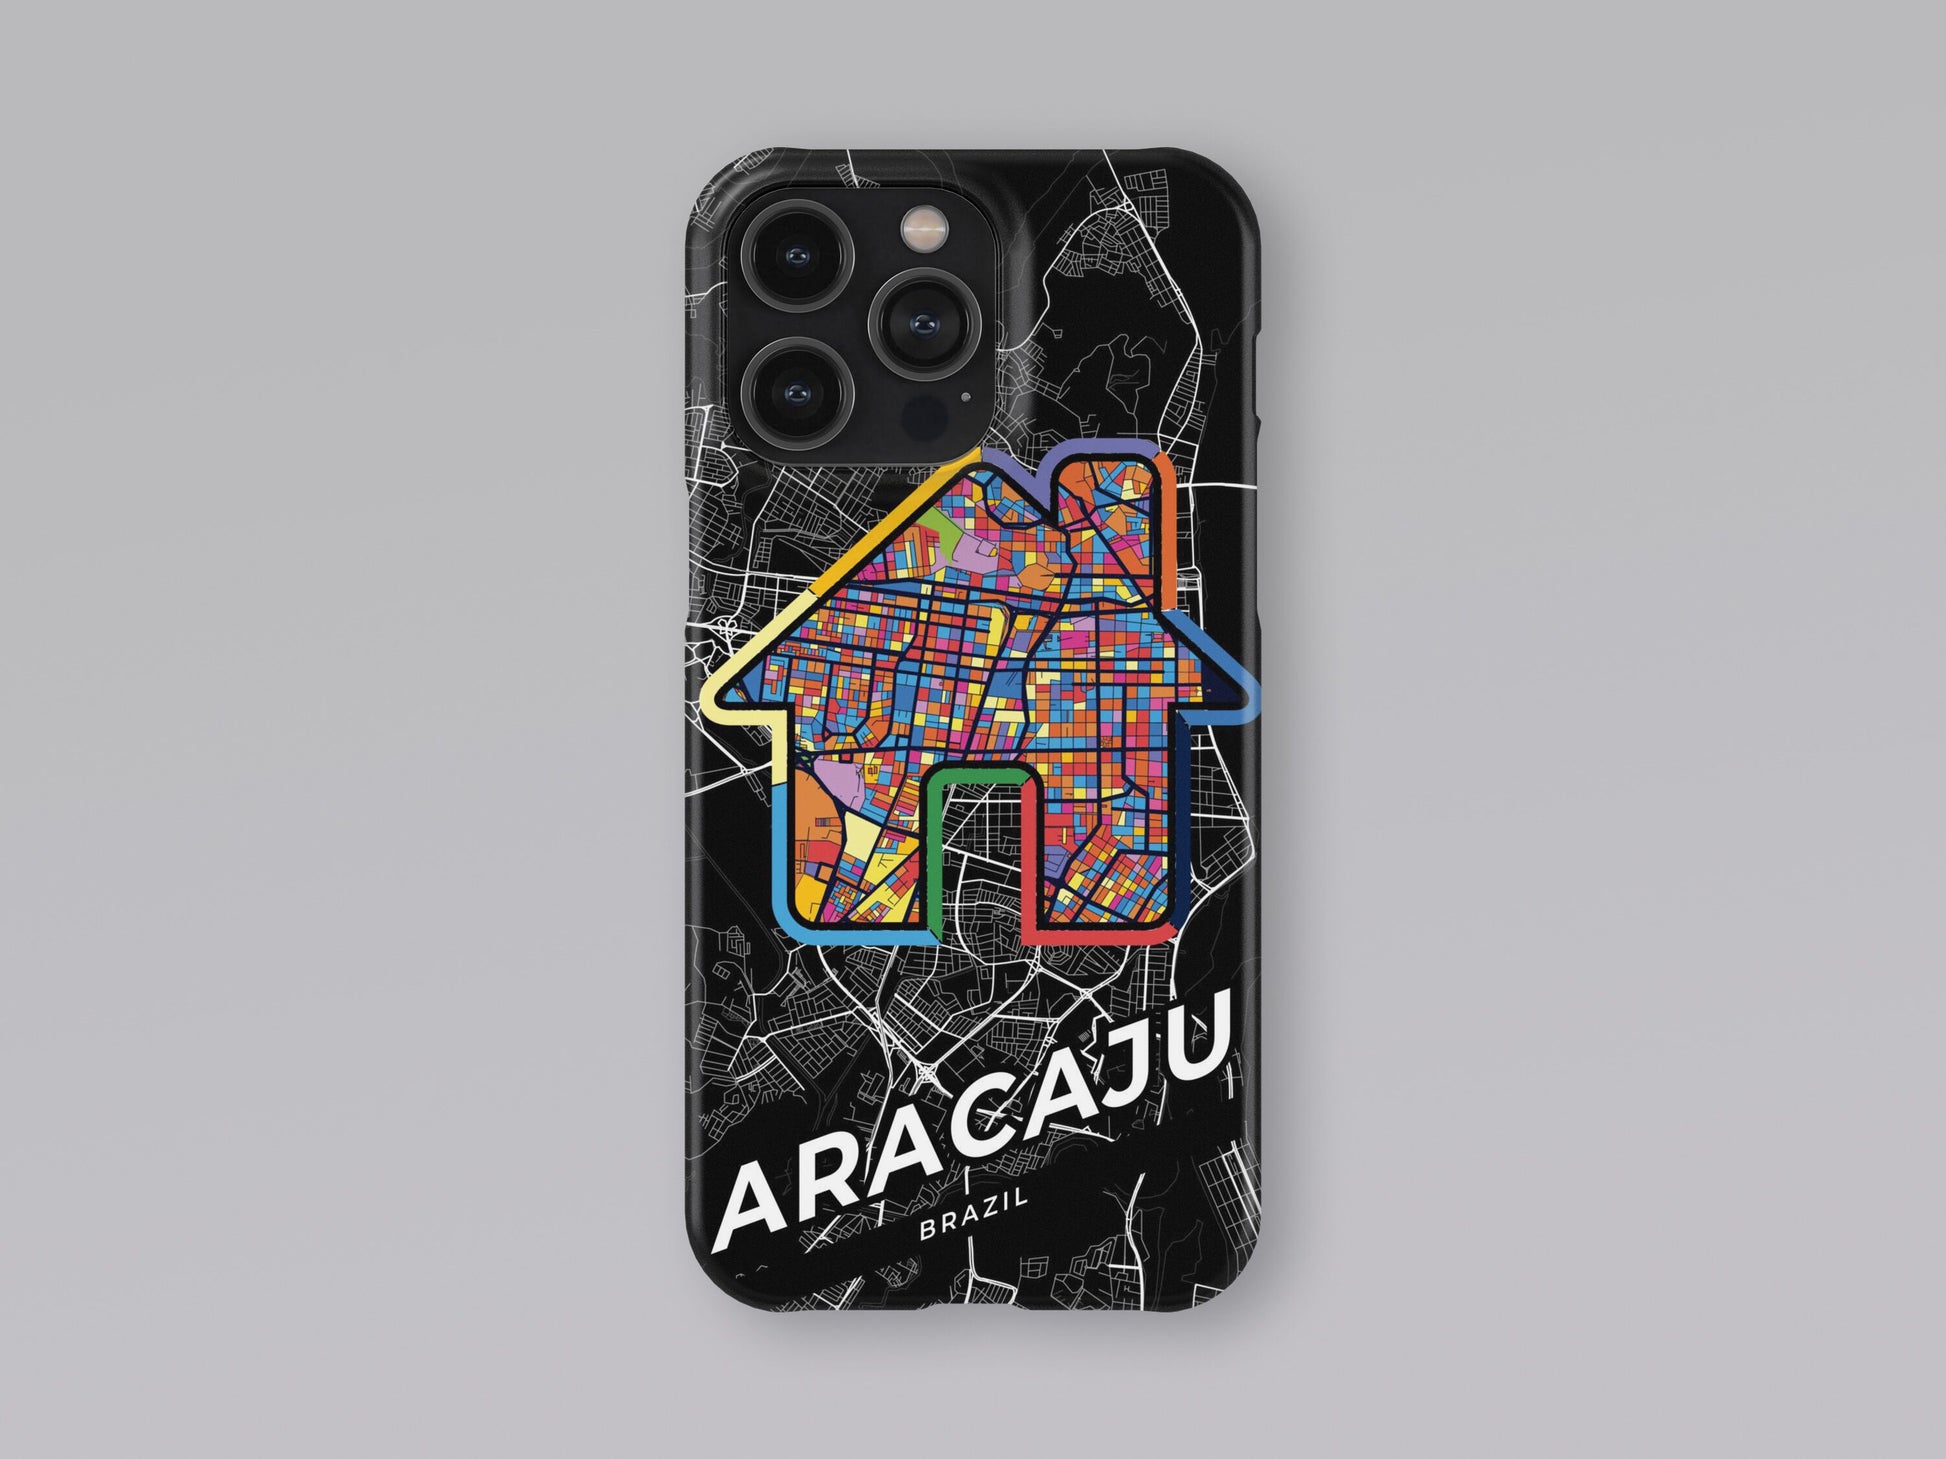 Aracaju Brazil slim phone case with colorful icon. Birthday, wedding or housewarming gift. Couple match cases. 3